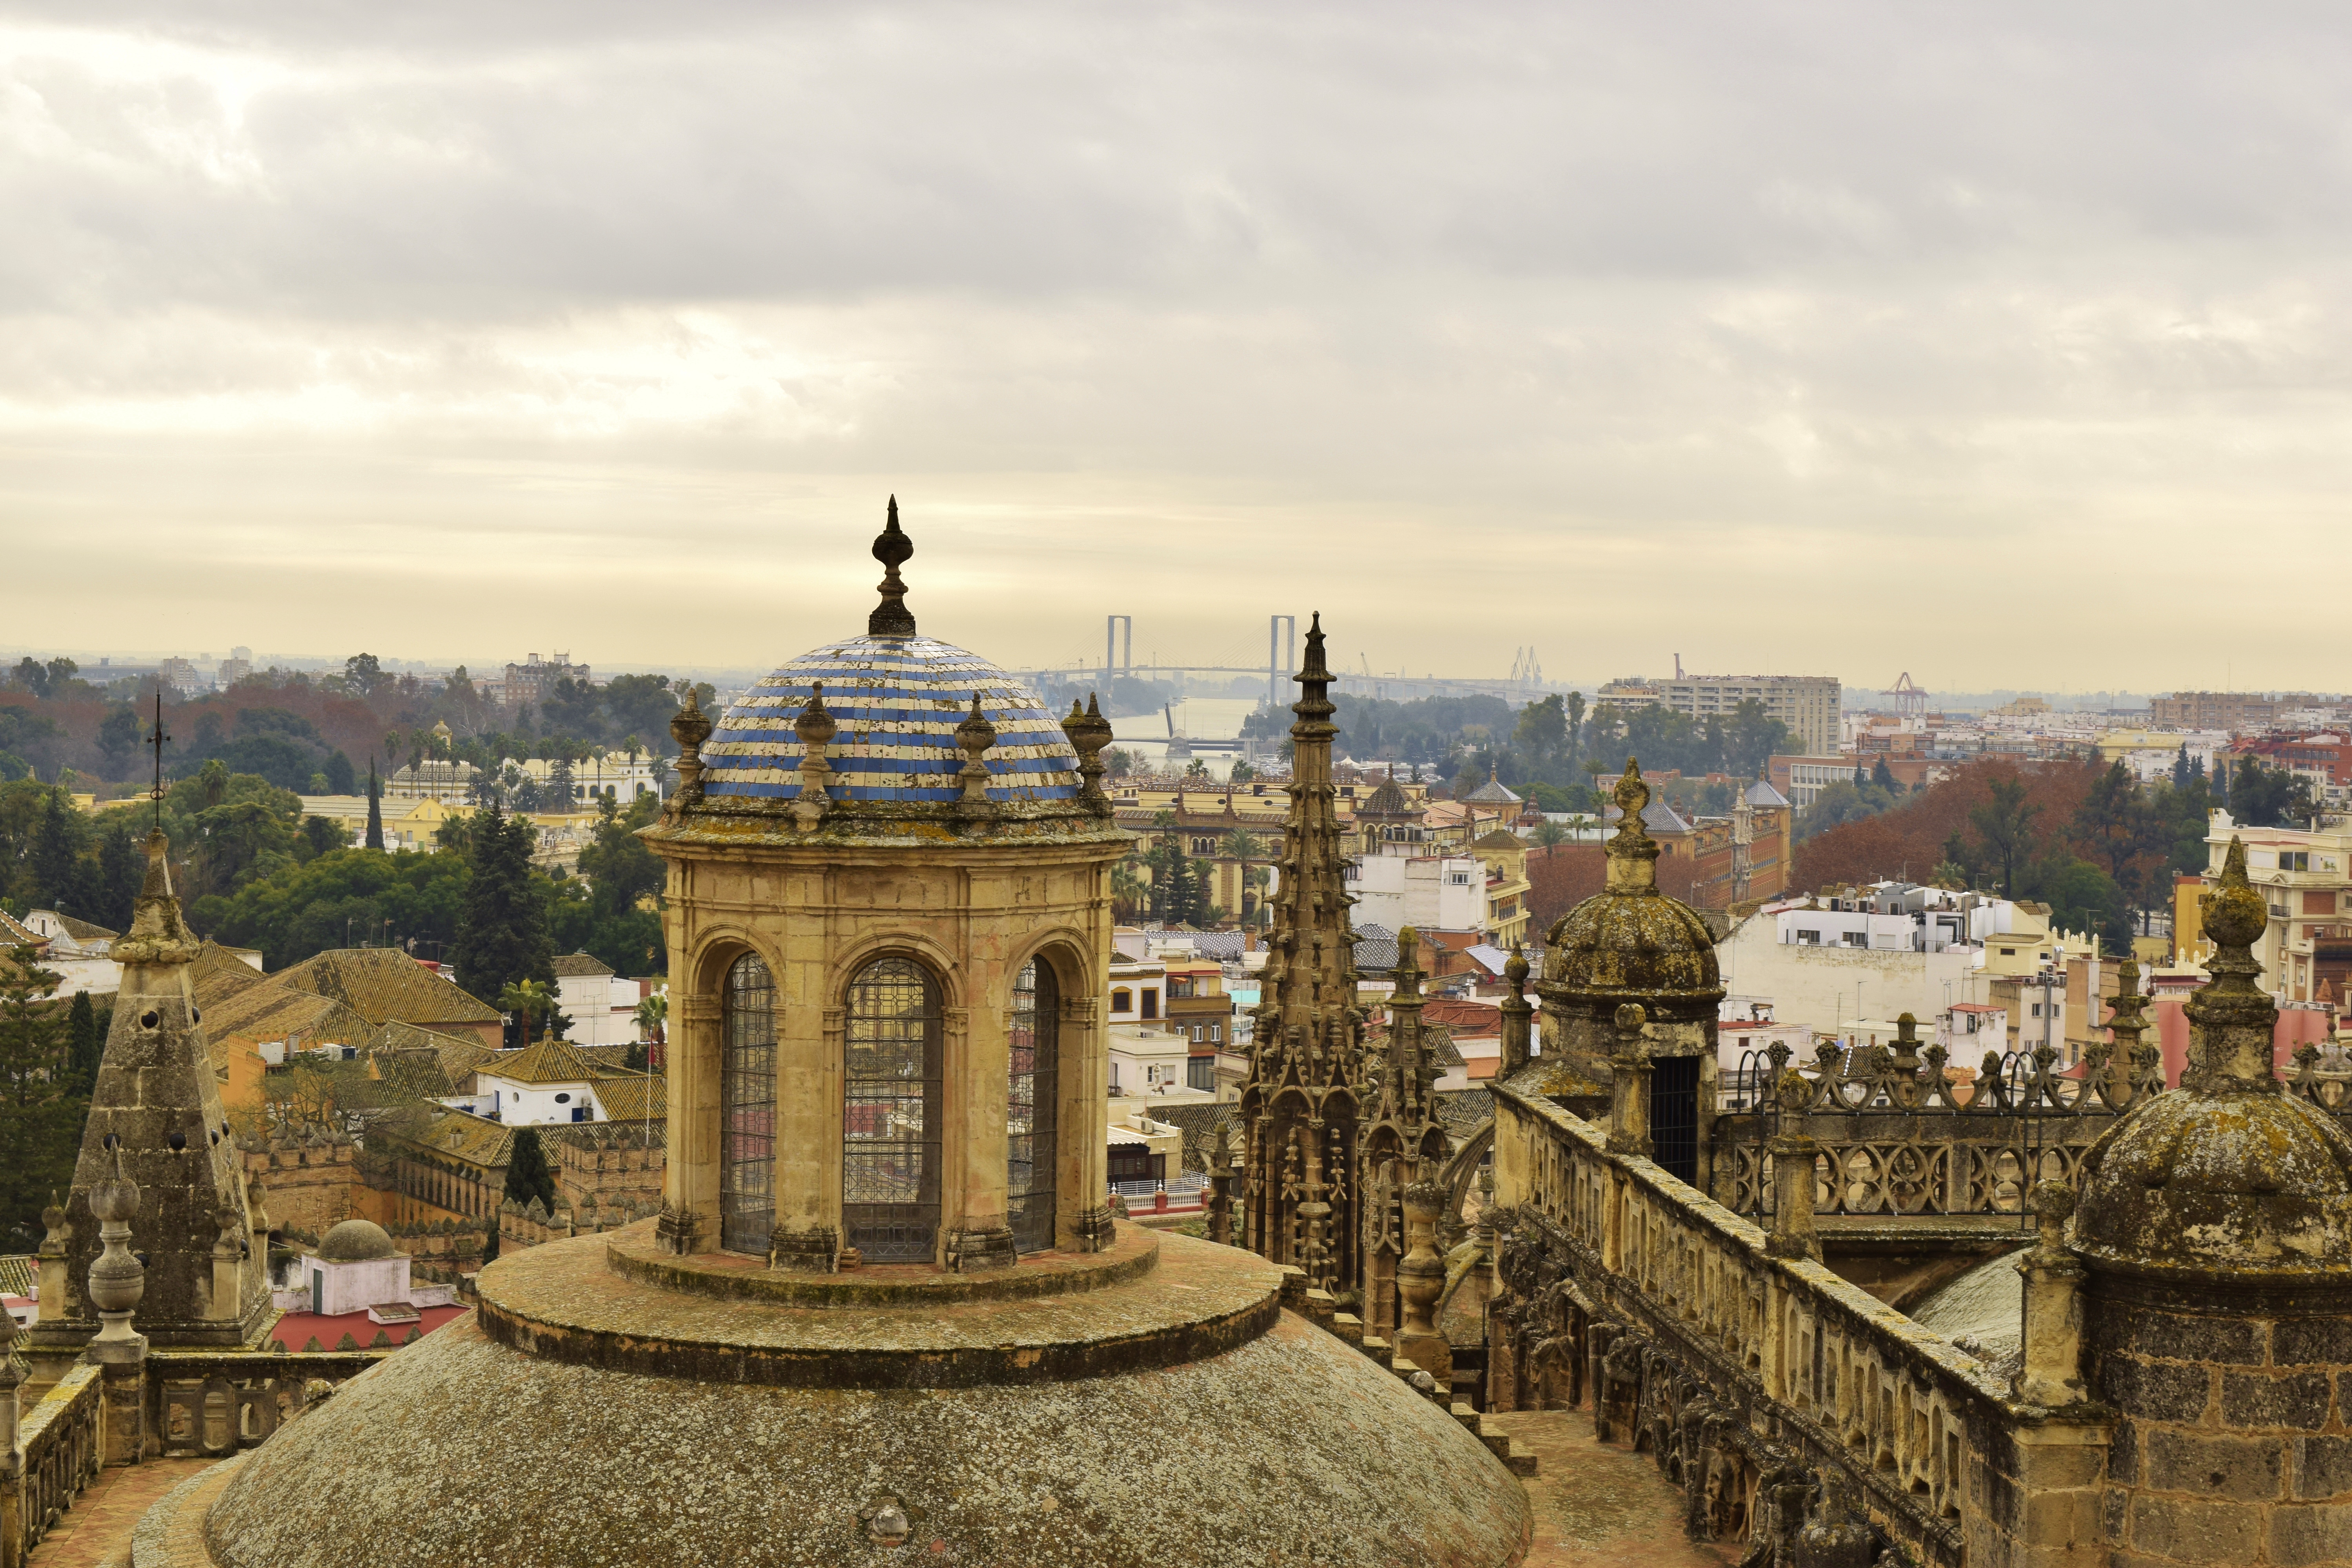 Taken from the Cathedral of Seville in Seville, Spain.